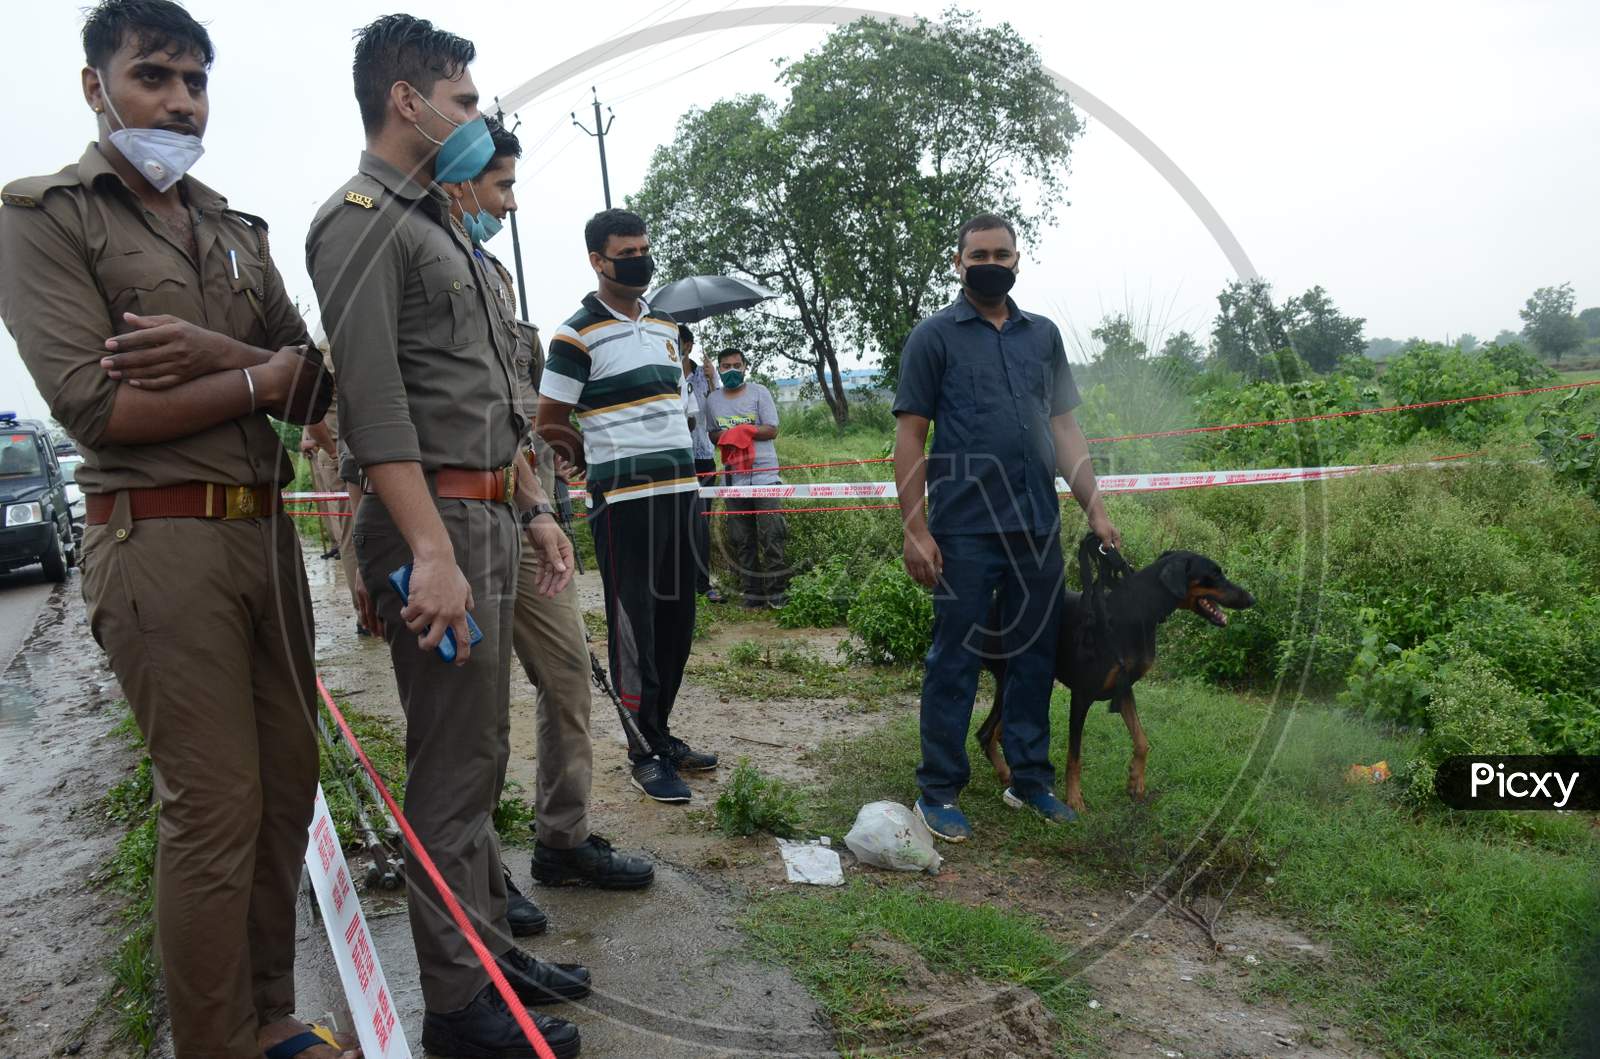 Police officials accompanied by a police dog at the site of the encounter of gangster Vikas Dubey who was killed when he tried to escape from police custody in Kanpur, Uttar Pradesh on July 10, 2020